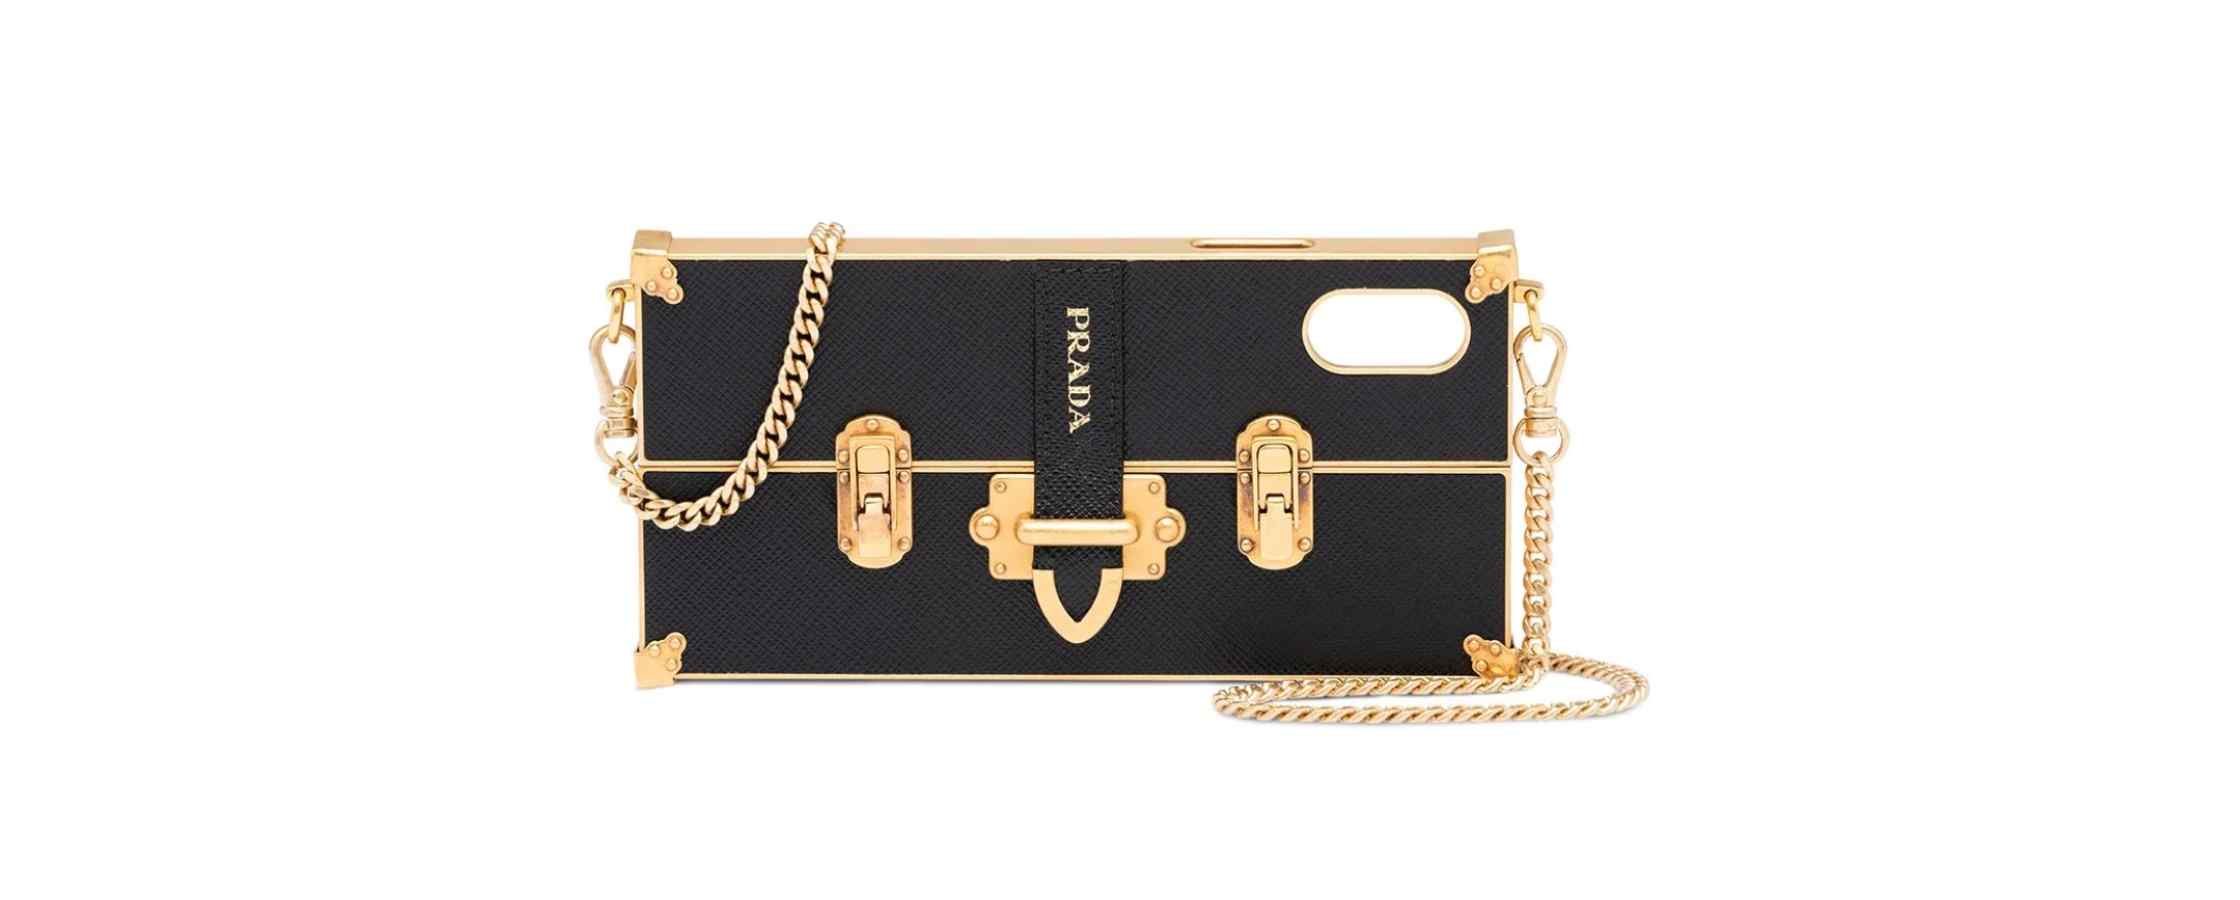 12 Luxurious Designer Phone Cases to Buy Right Now